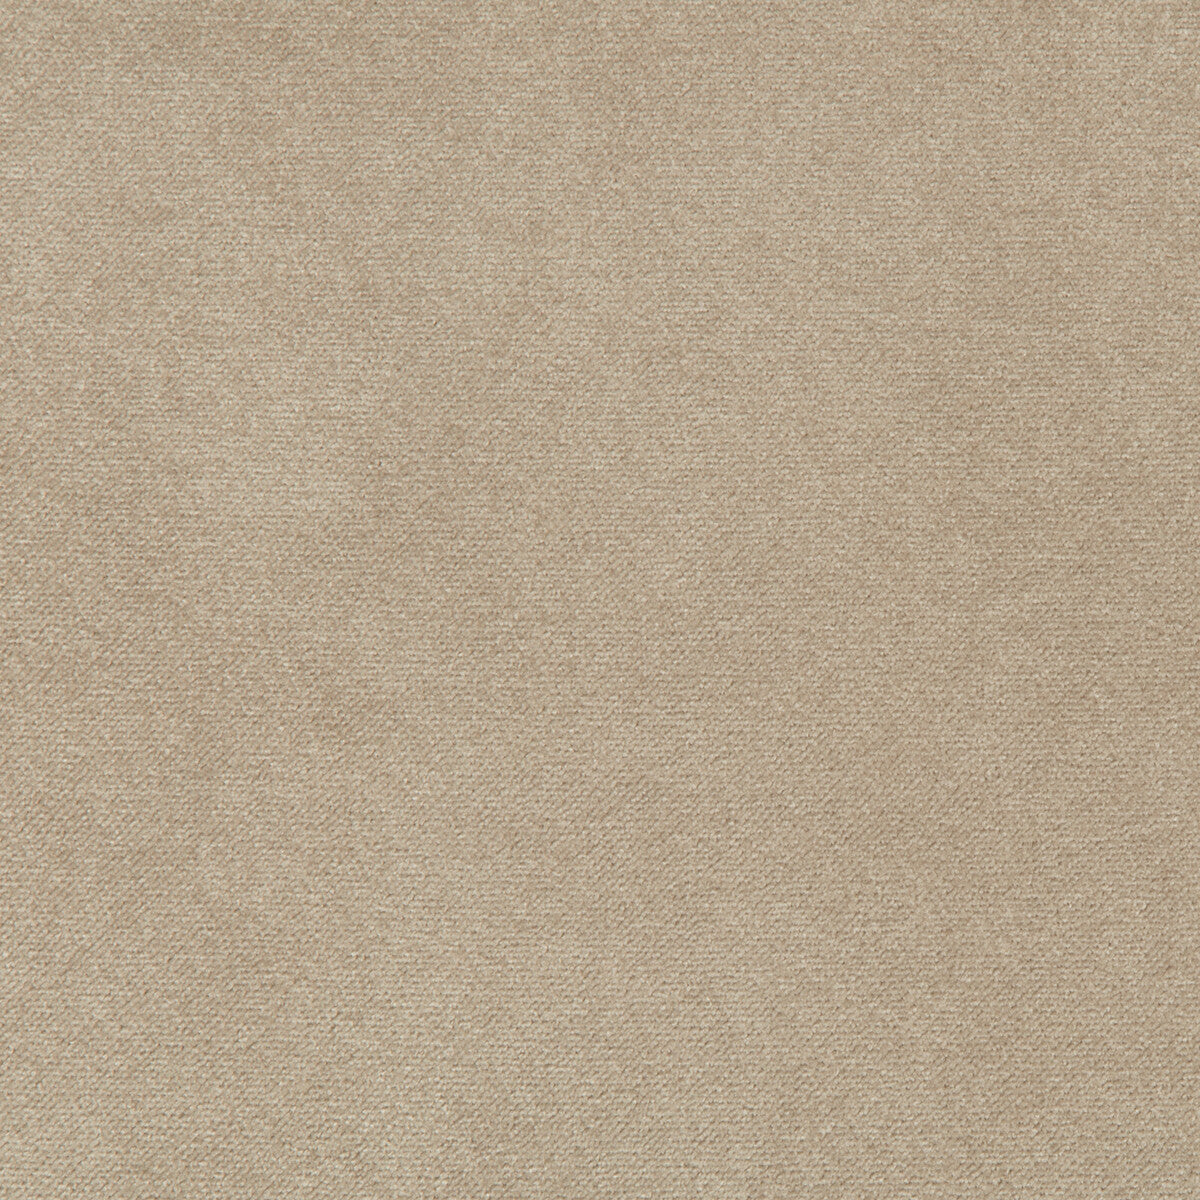 Madison Velvet fabric in porcini color - pattern 35402.16.0 - by Kravet Contract